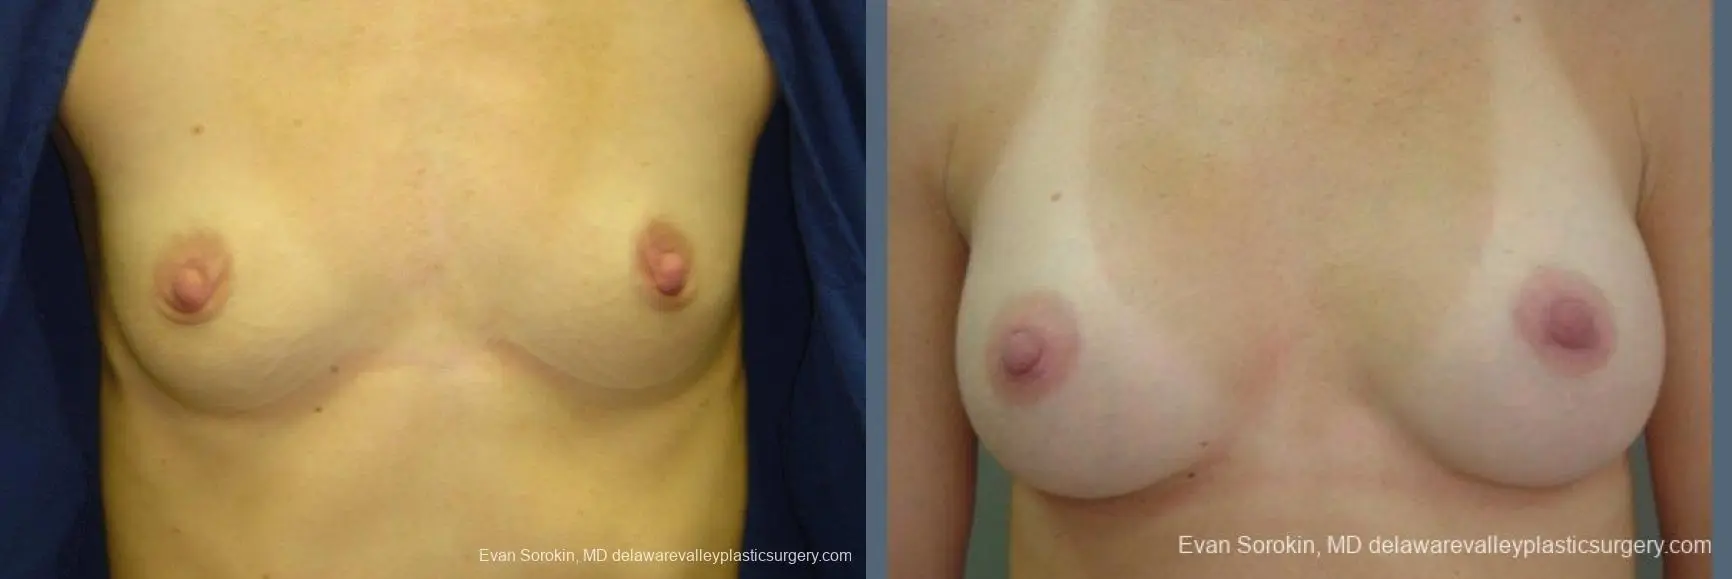 Philadelphia Breast Augmentation 9403 - Before and After 1